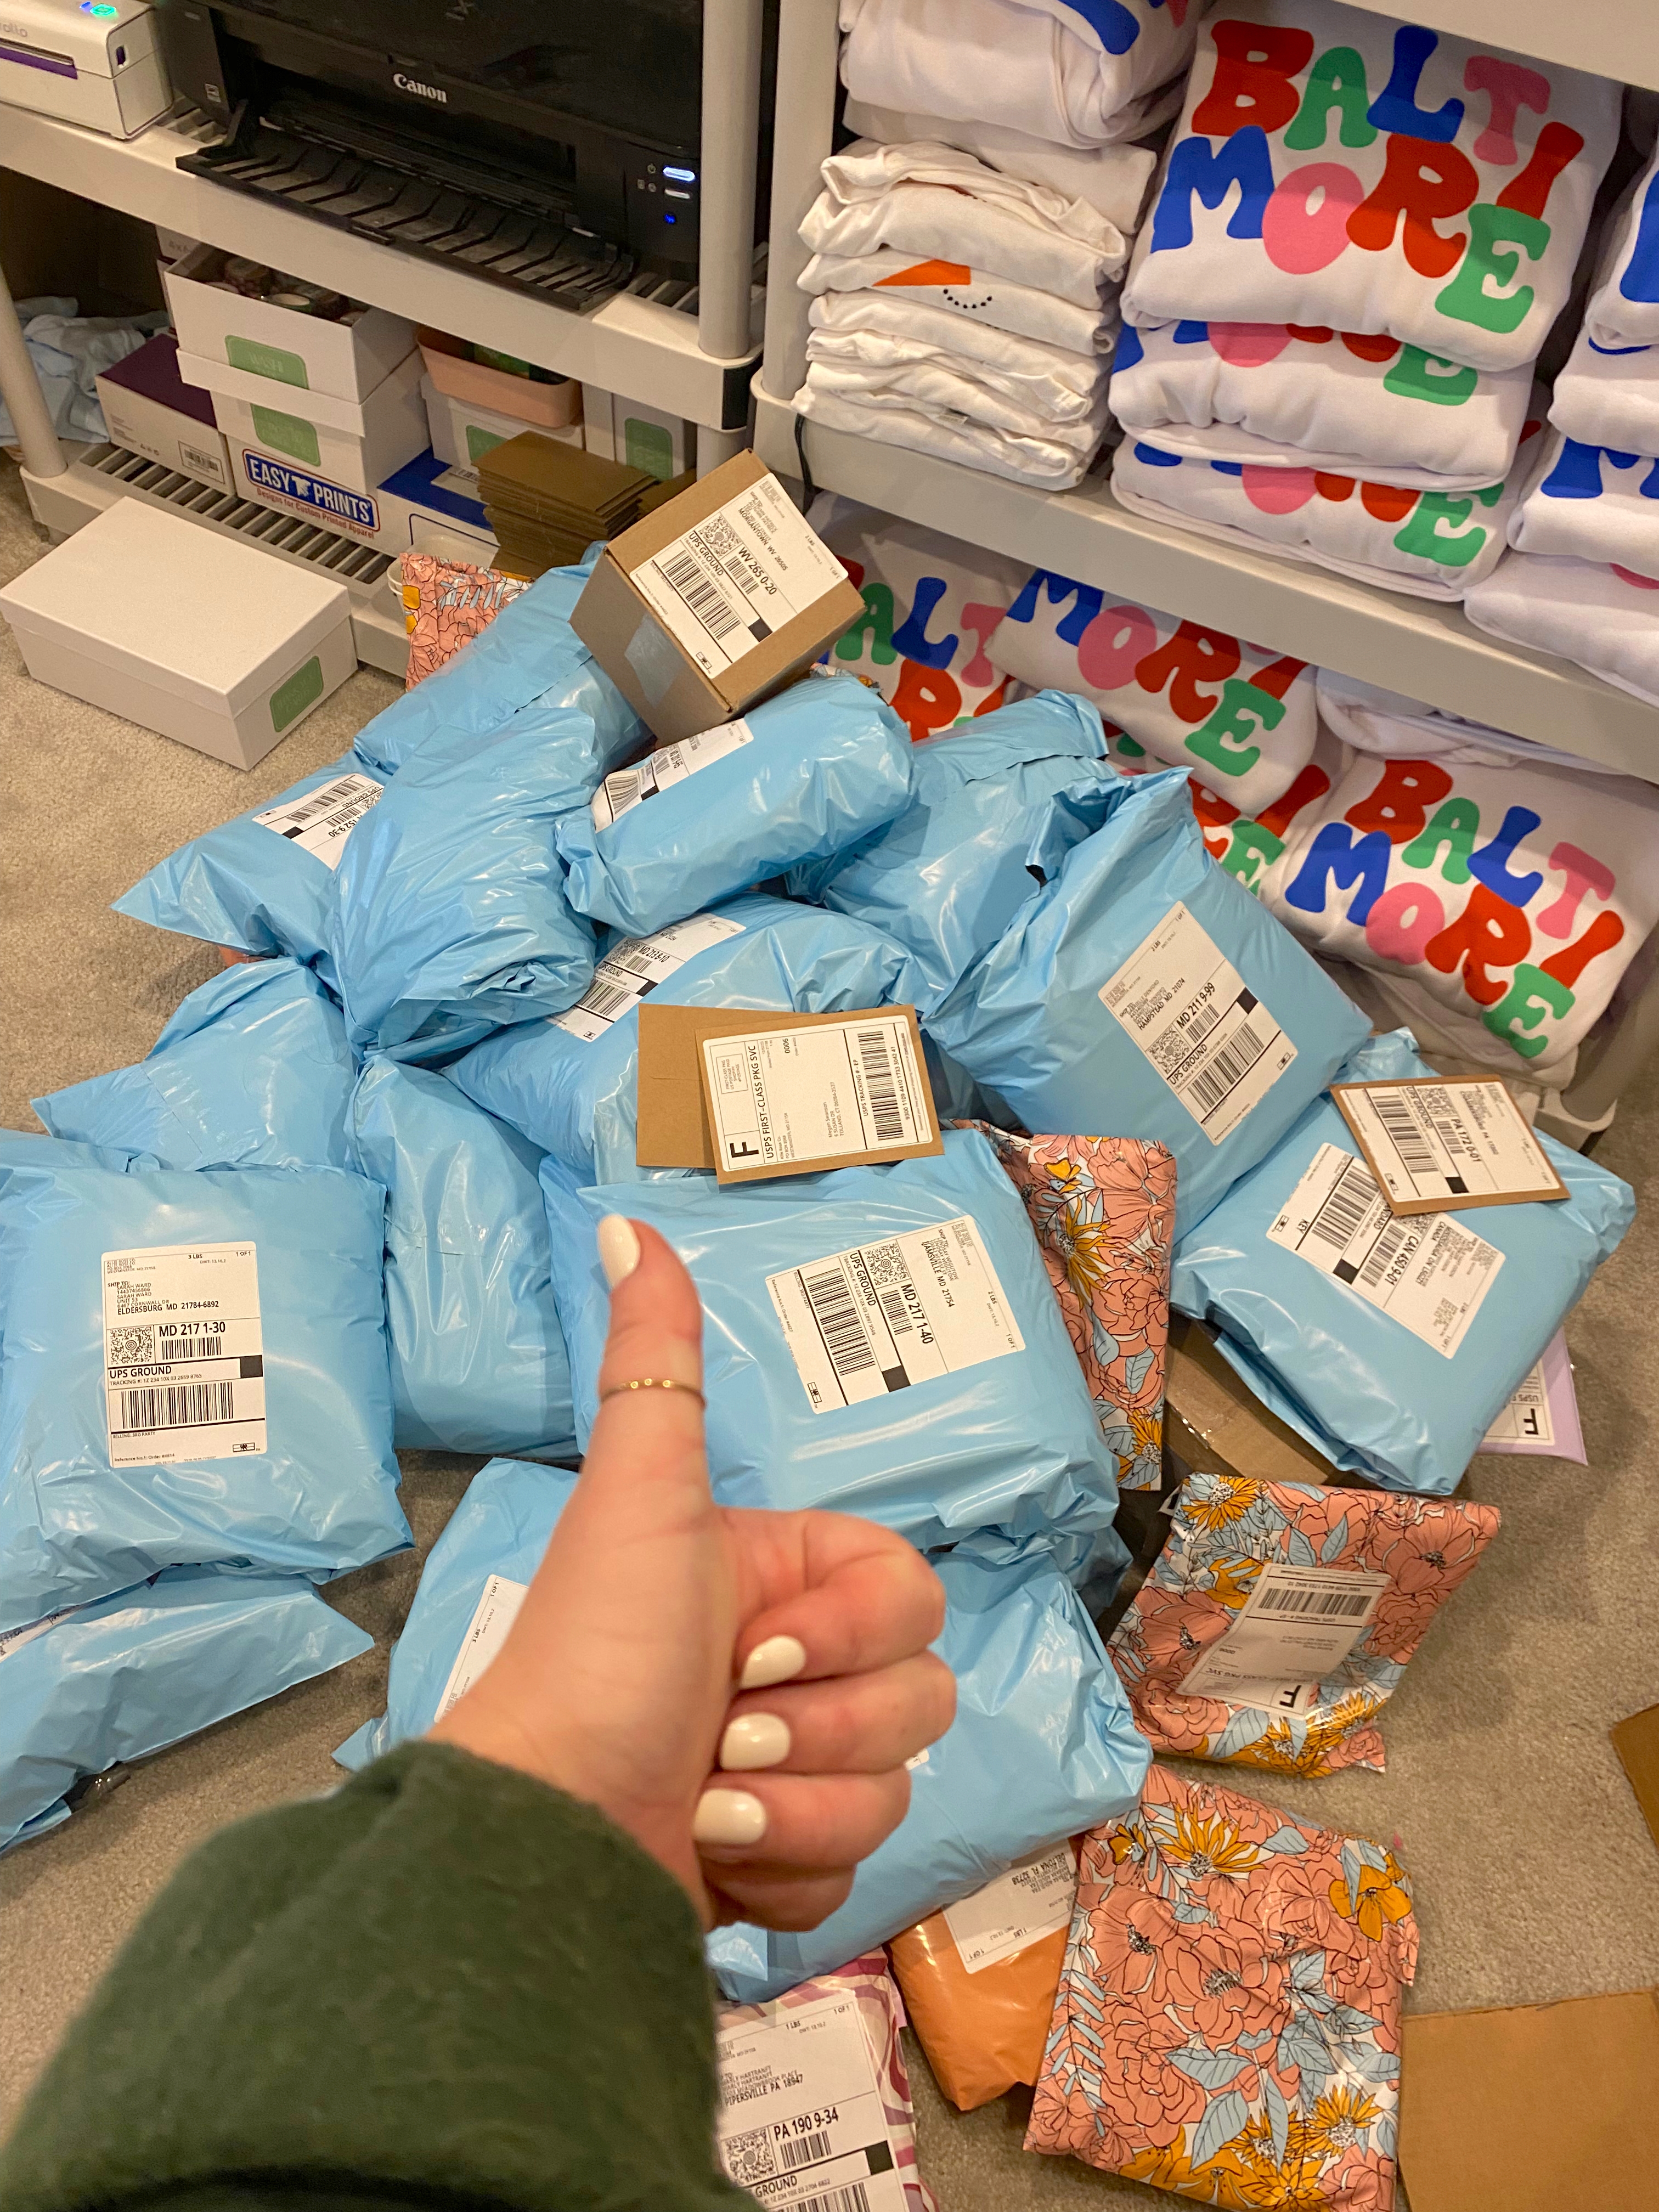 Thumbs up in the foreground with a stack of folded white sweaters with Baltimore printed in multiple colors and blue mail bags in the background.